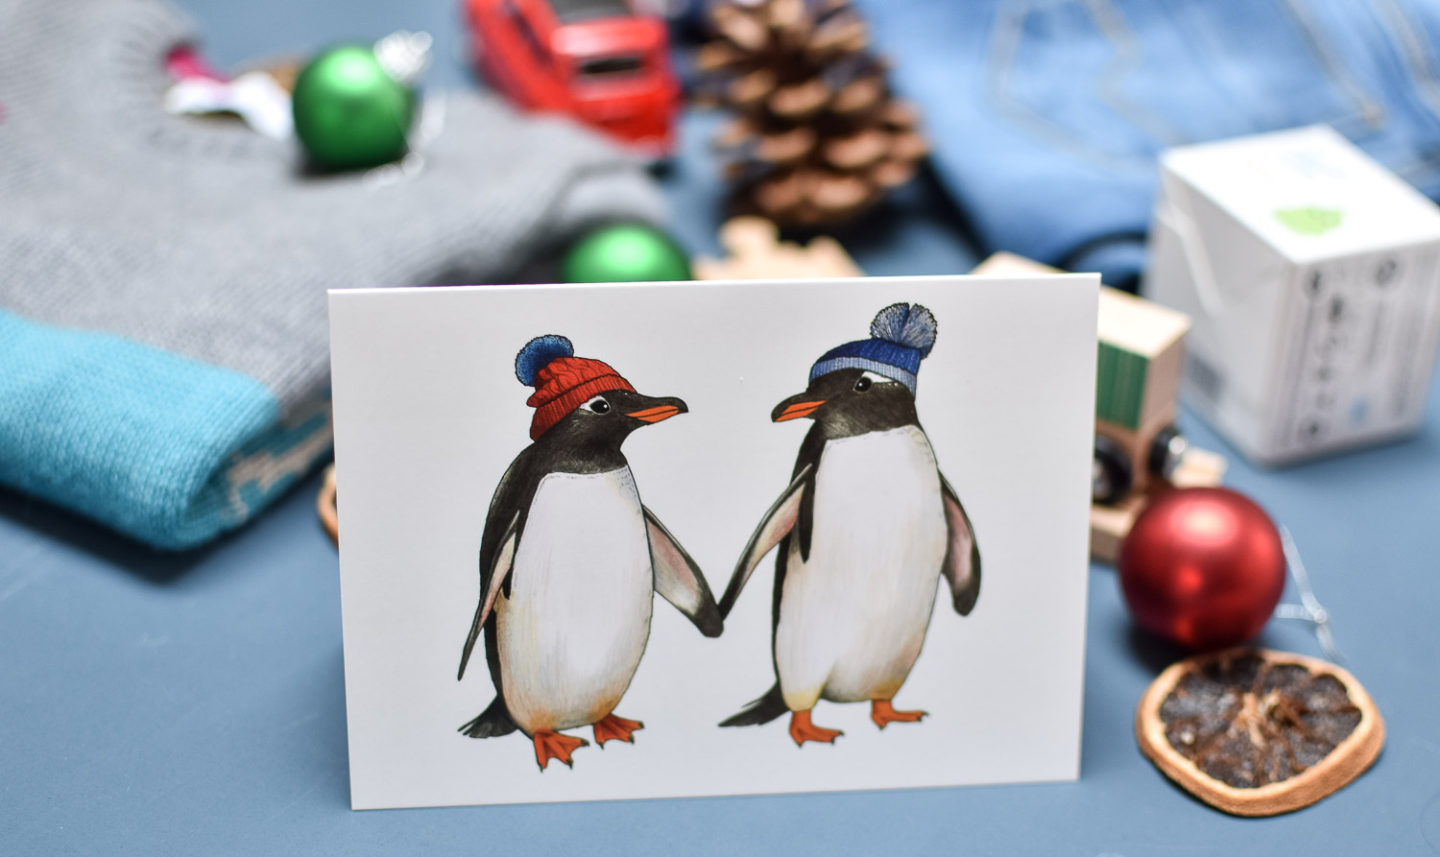 Card with penguins with hats on from Etsy UK